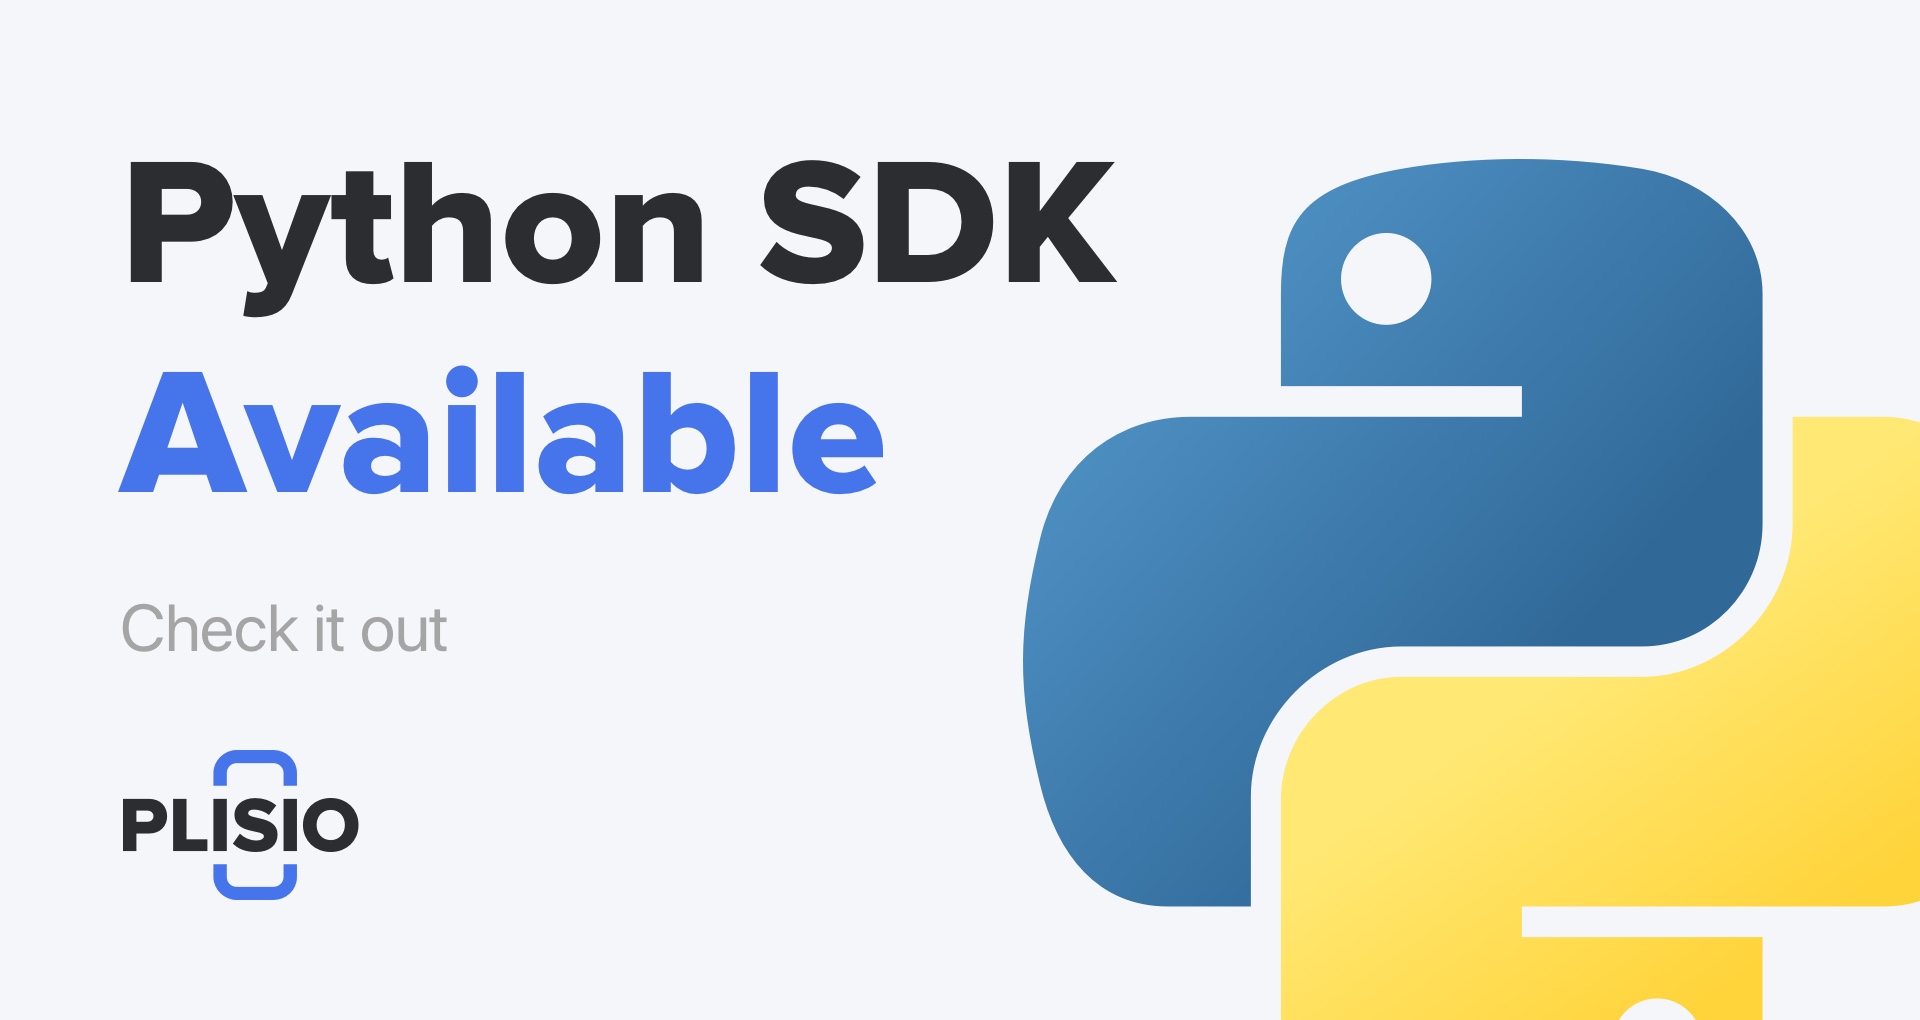 Python SDK is Now Available. Check It Out!